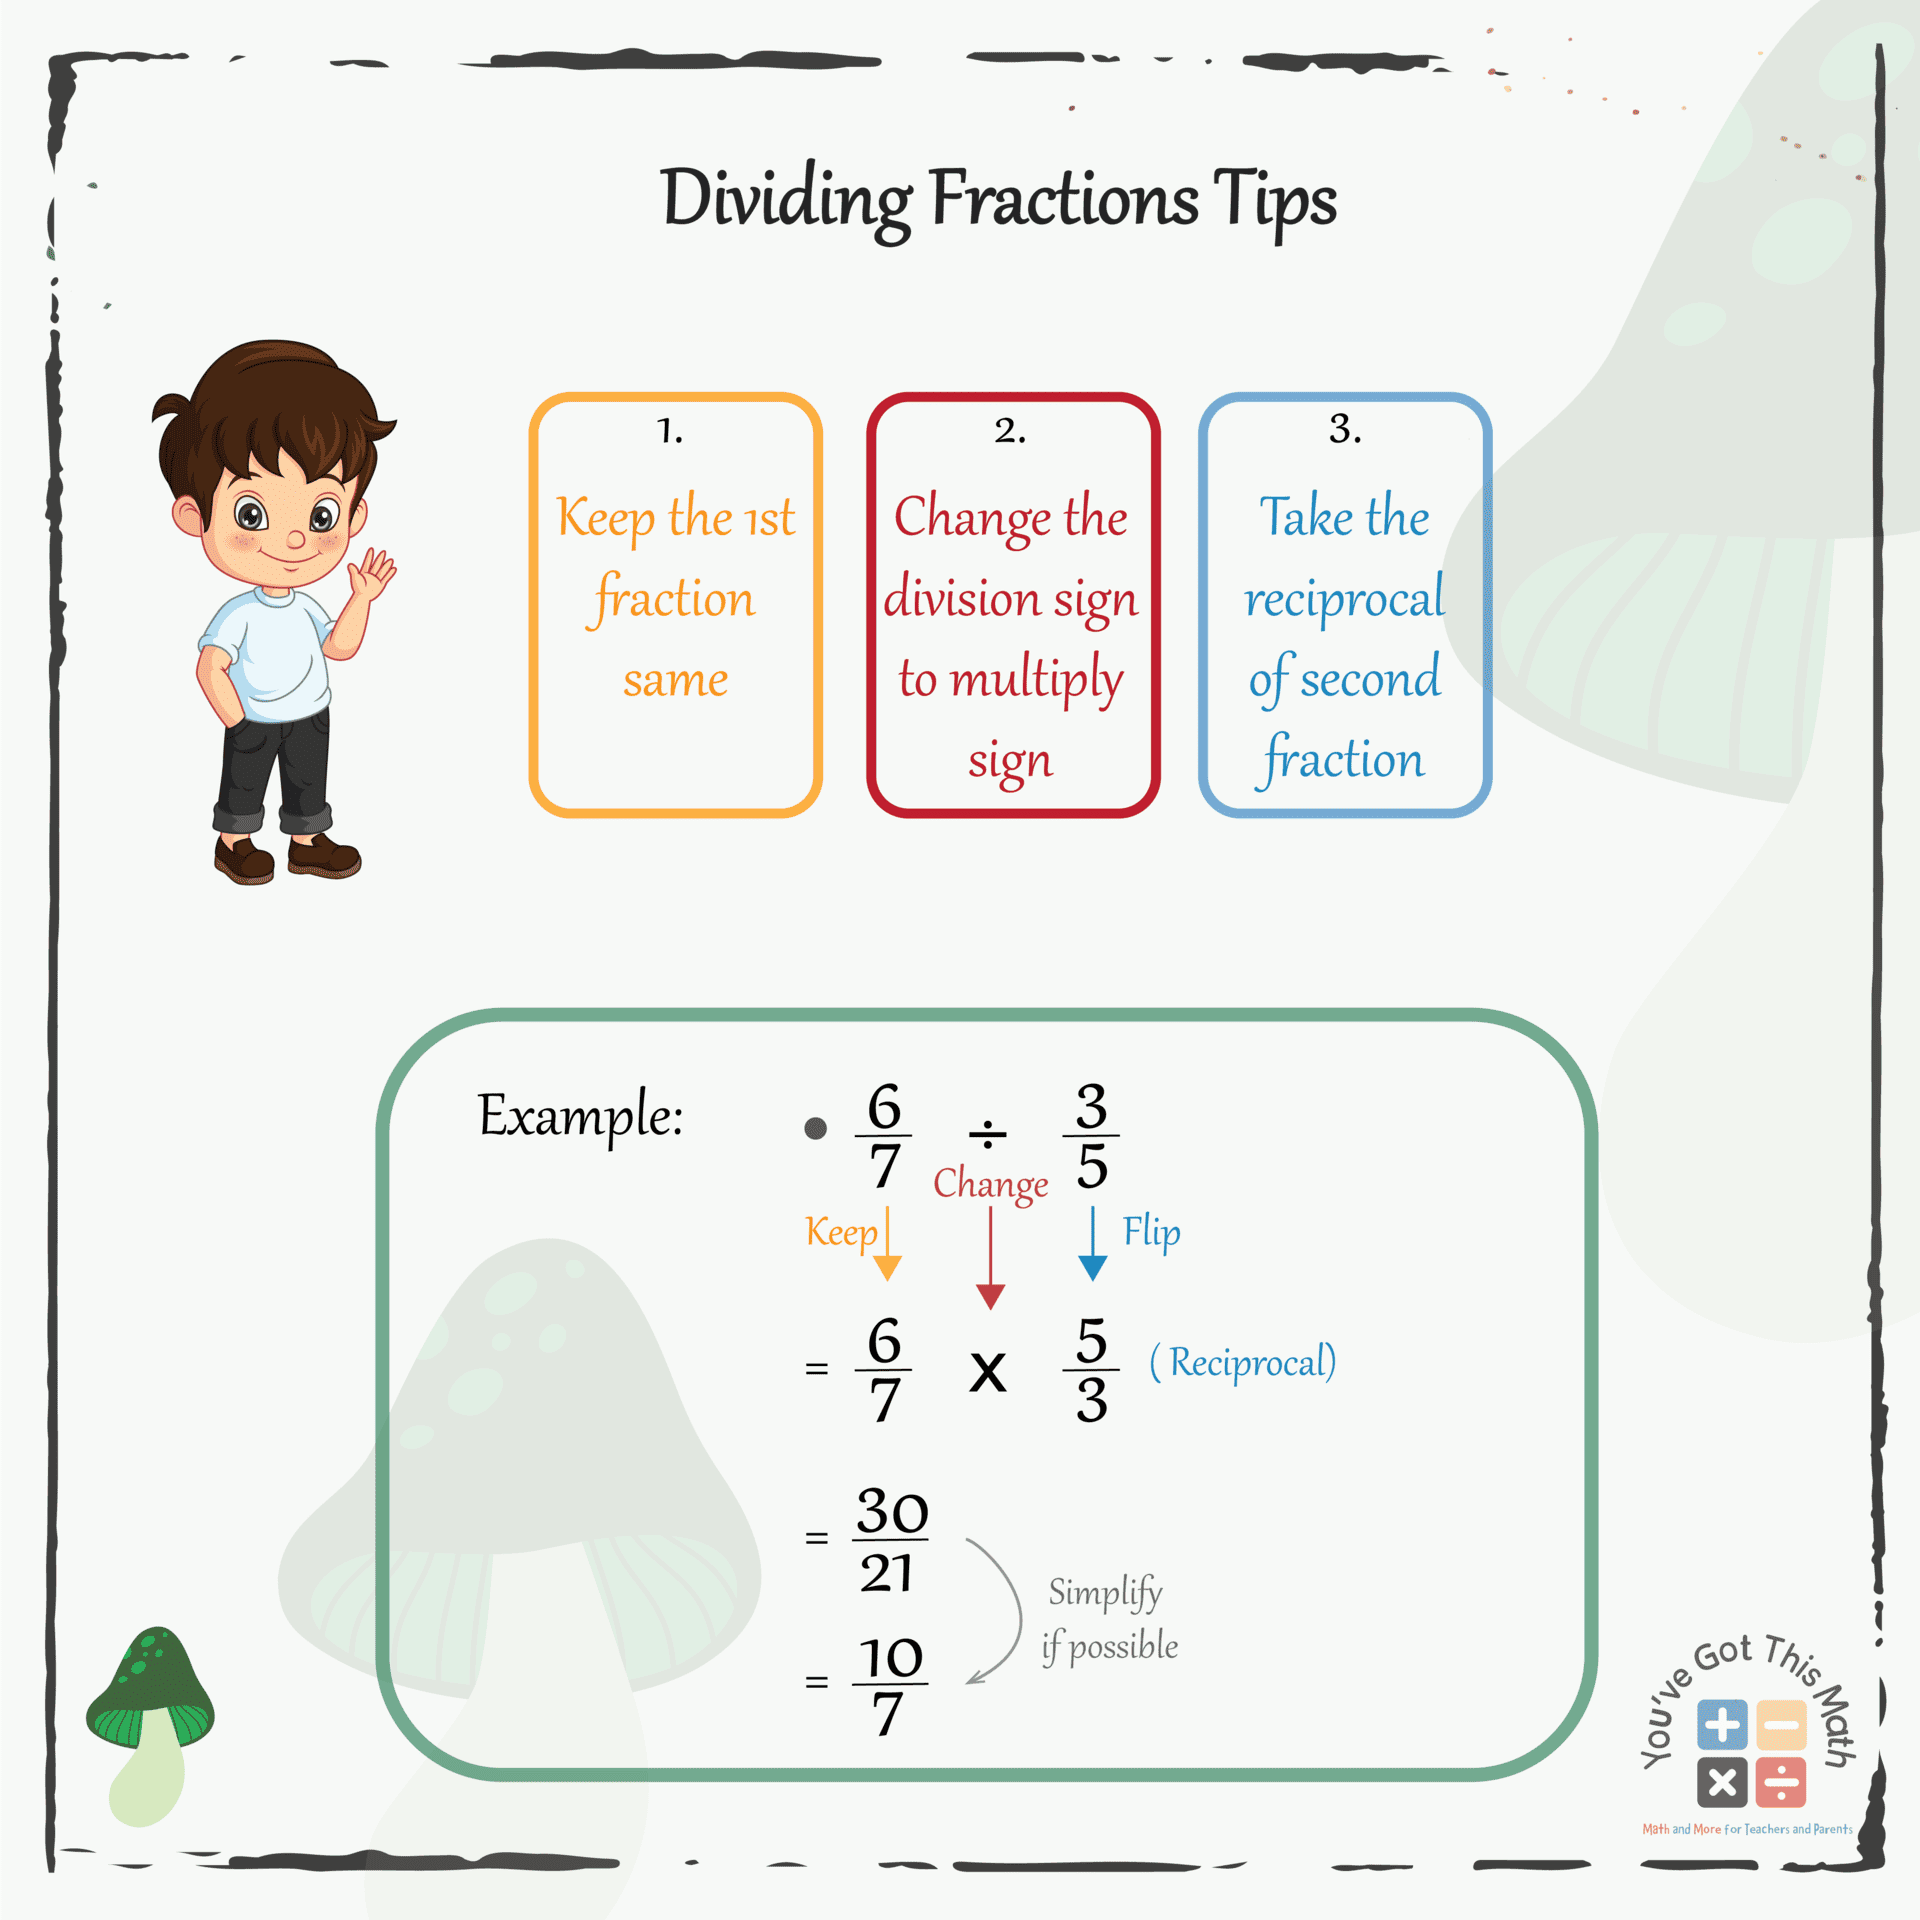 Dividing Fractions Tips